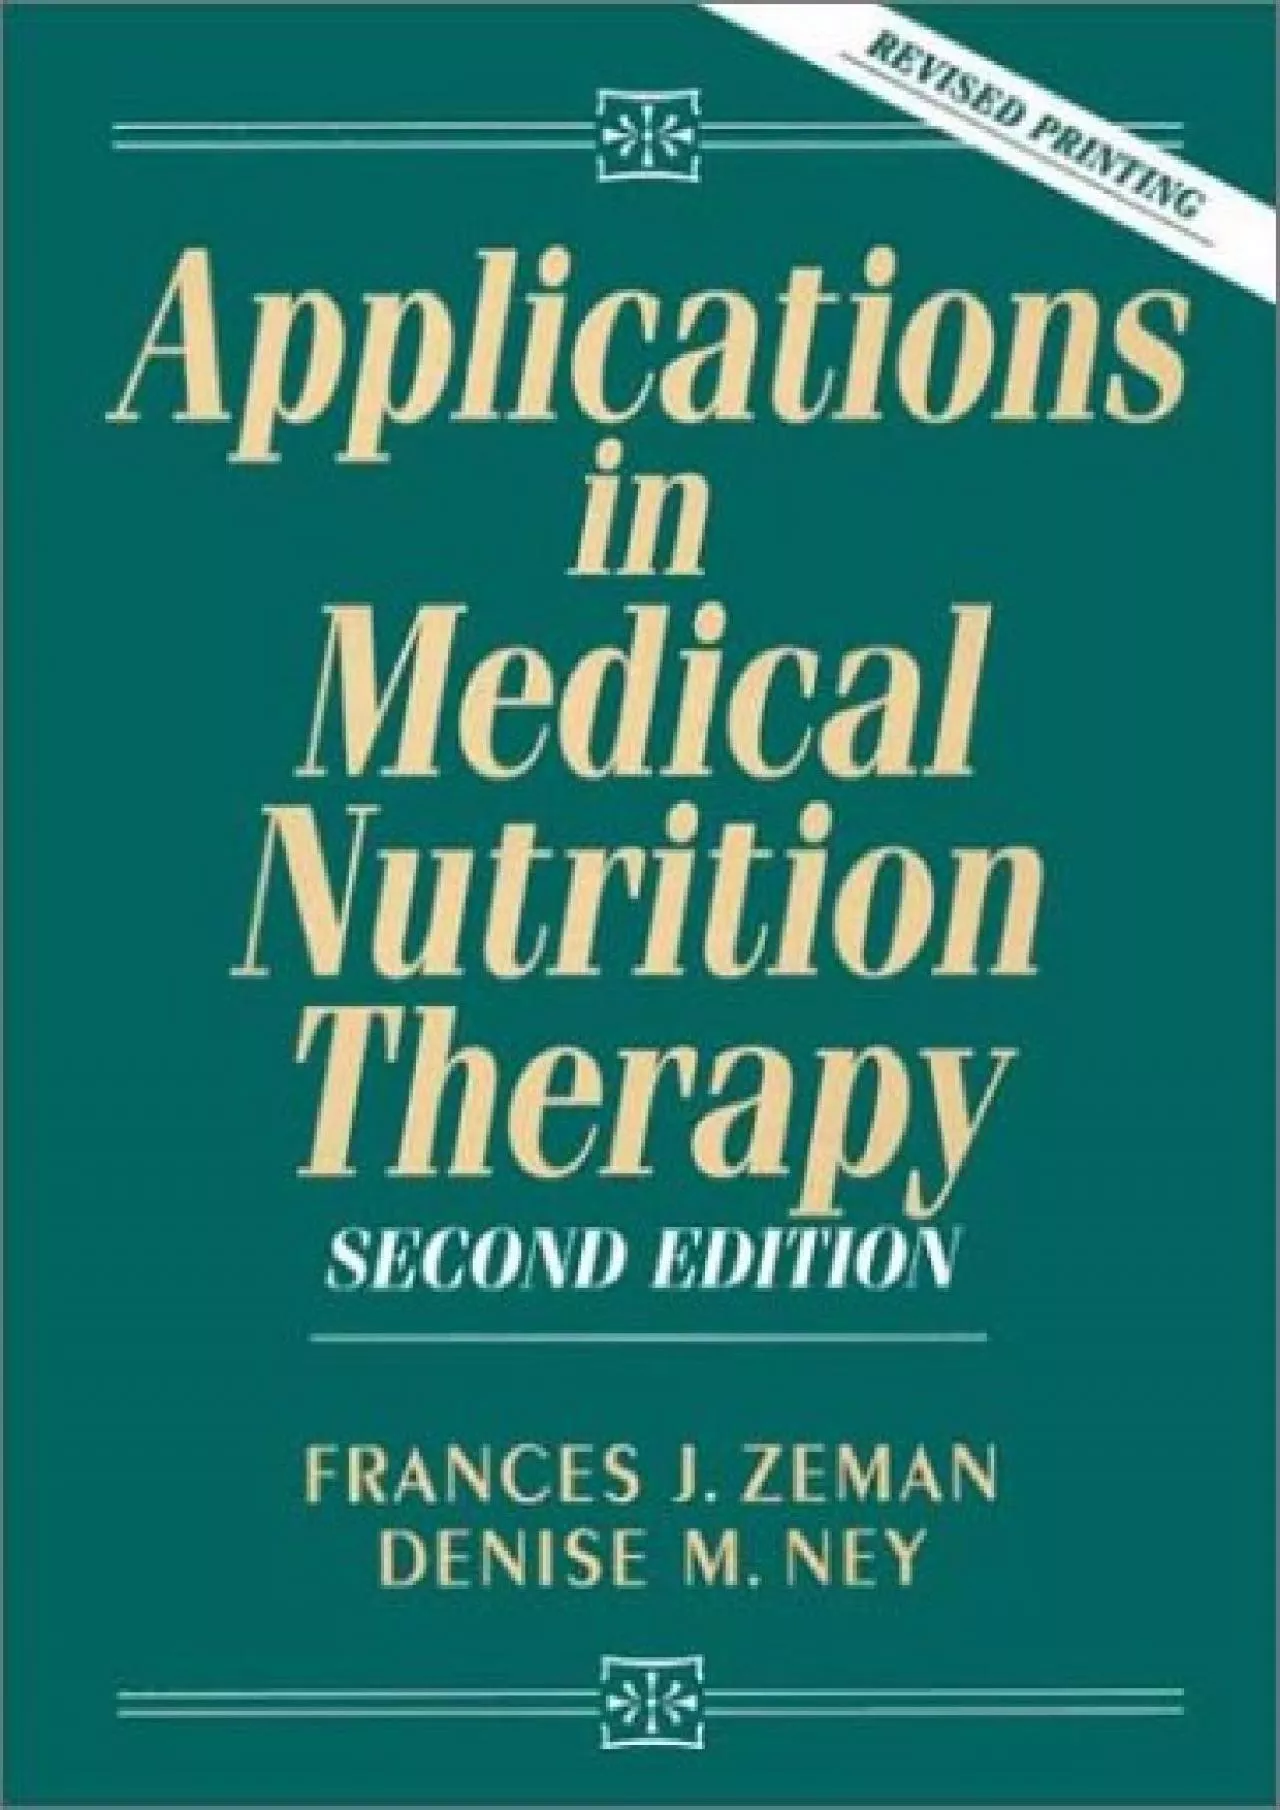 (DOWNLOAD)-Applications in Medical Nutrition Therapy (2nd Edition)